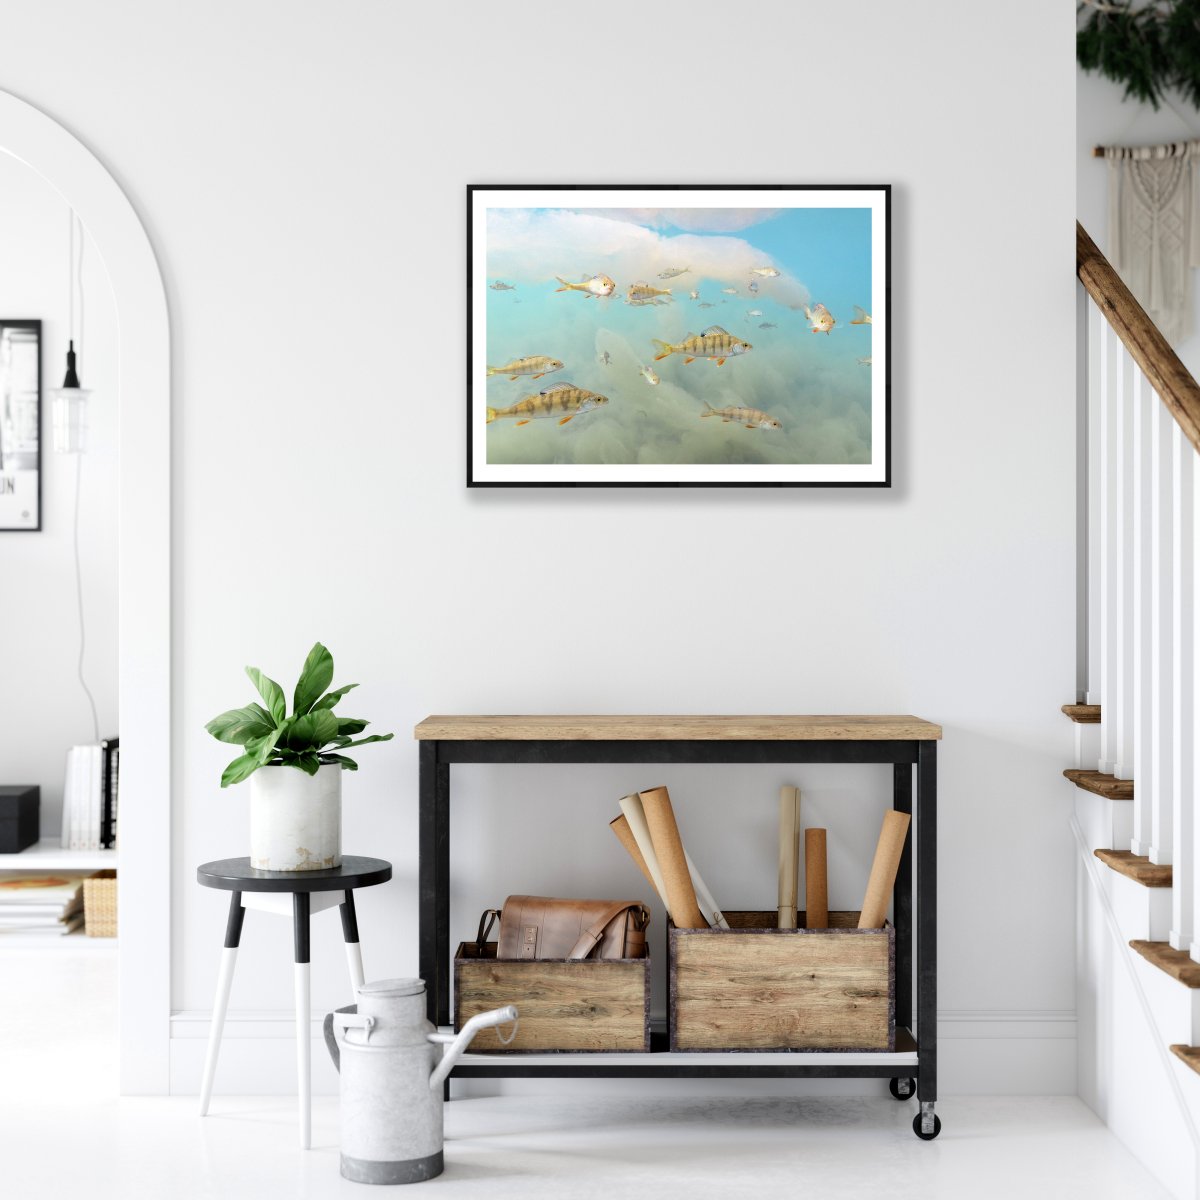 Framed print of perch seemingly flying in algae-filled lake above a desk in a living room.